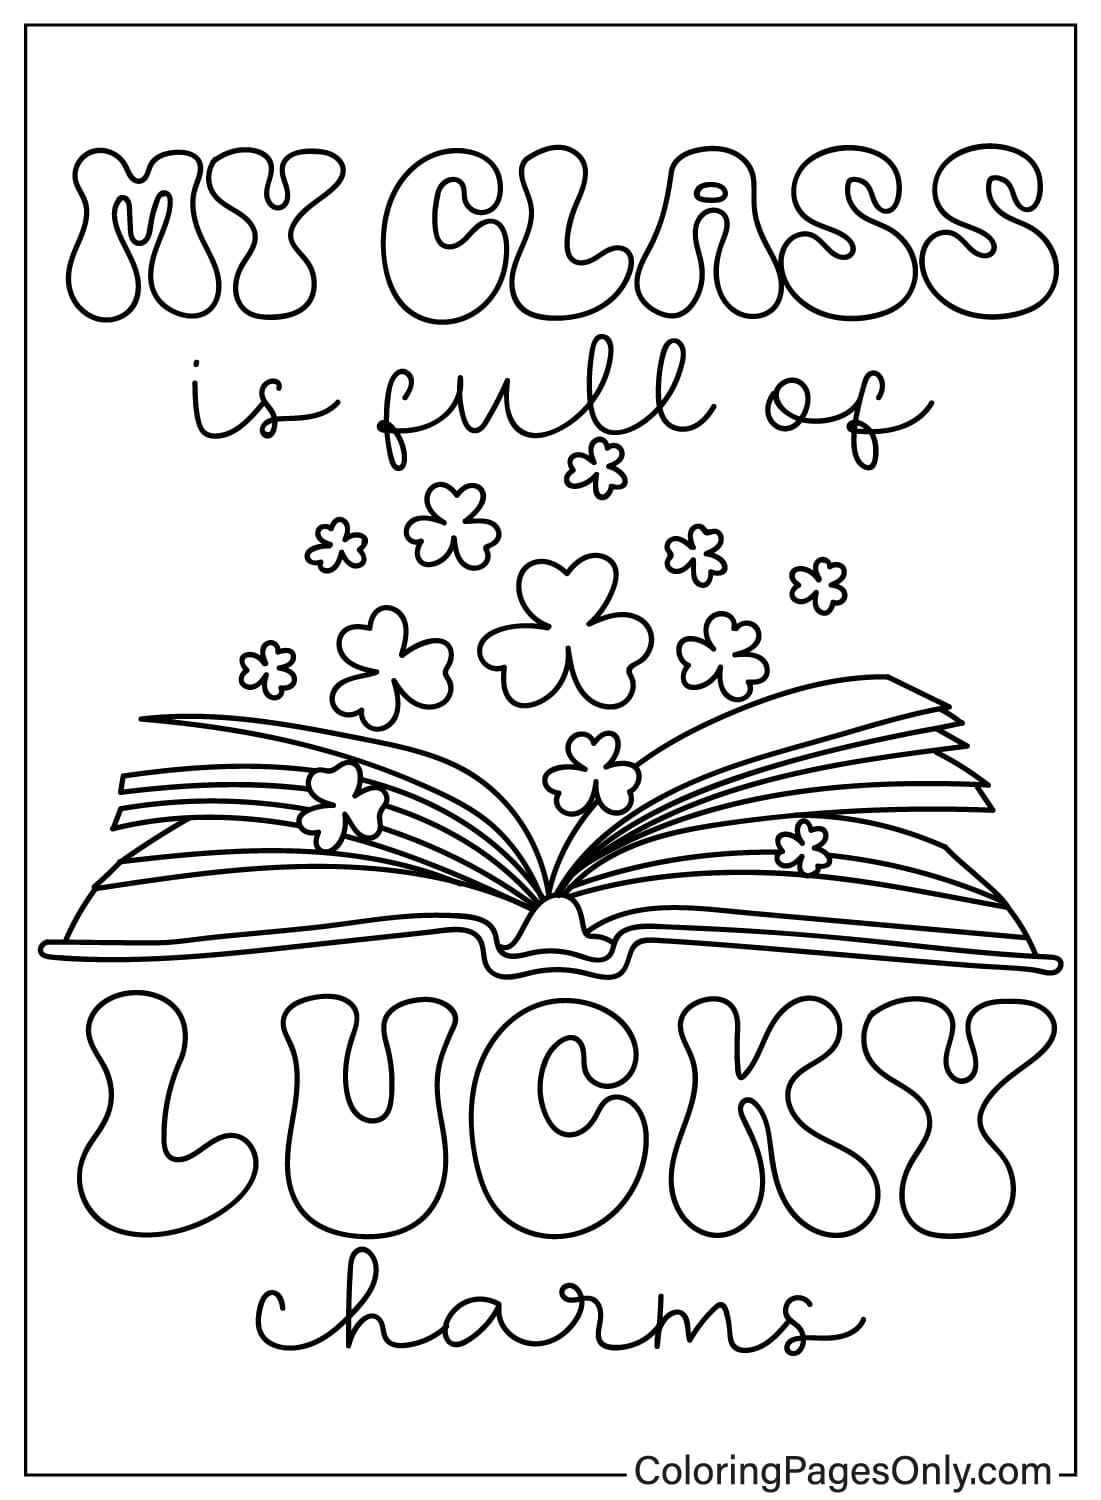 20 Lucky Charms Coloring Pages ColoringPagesOnly com